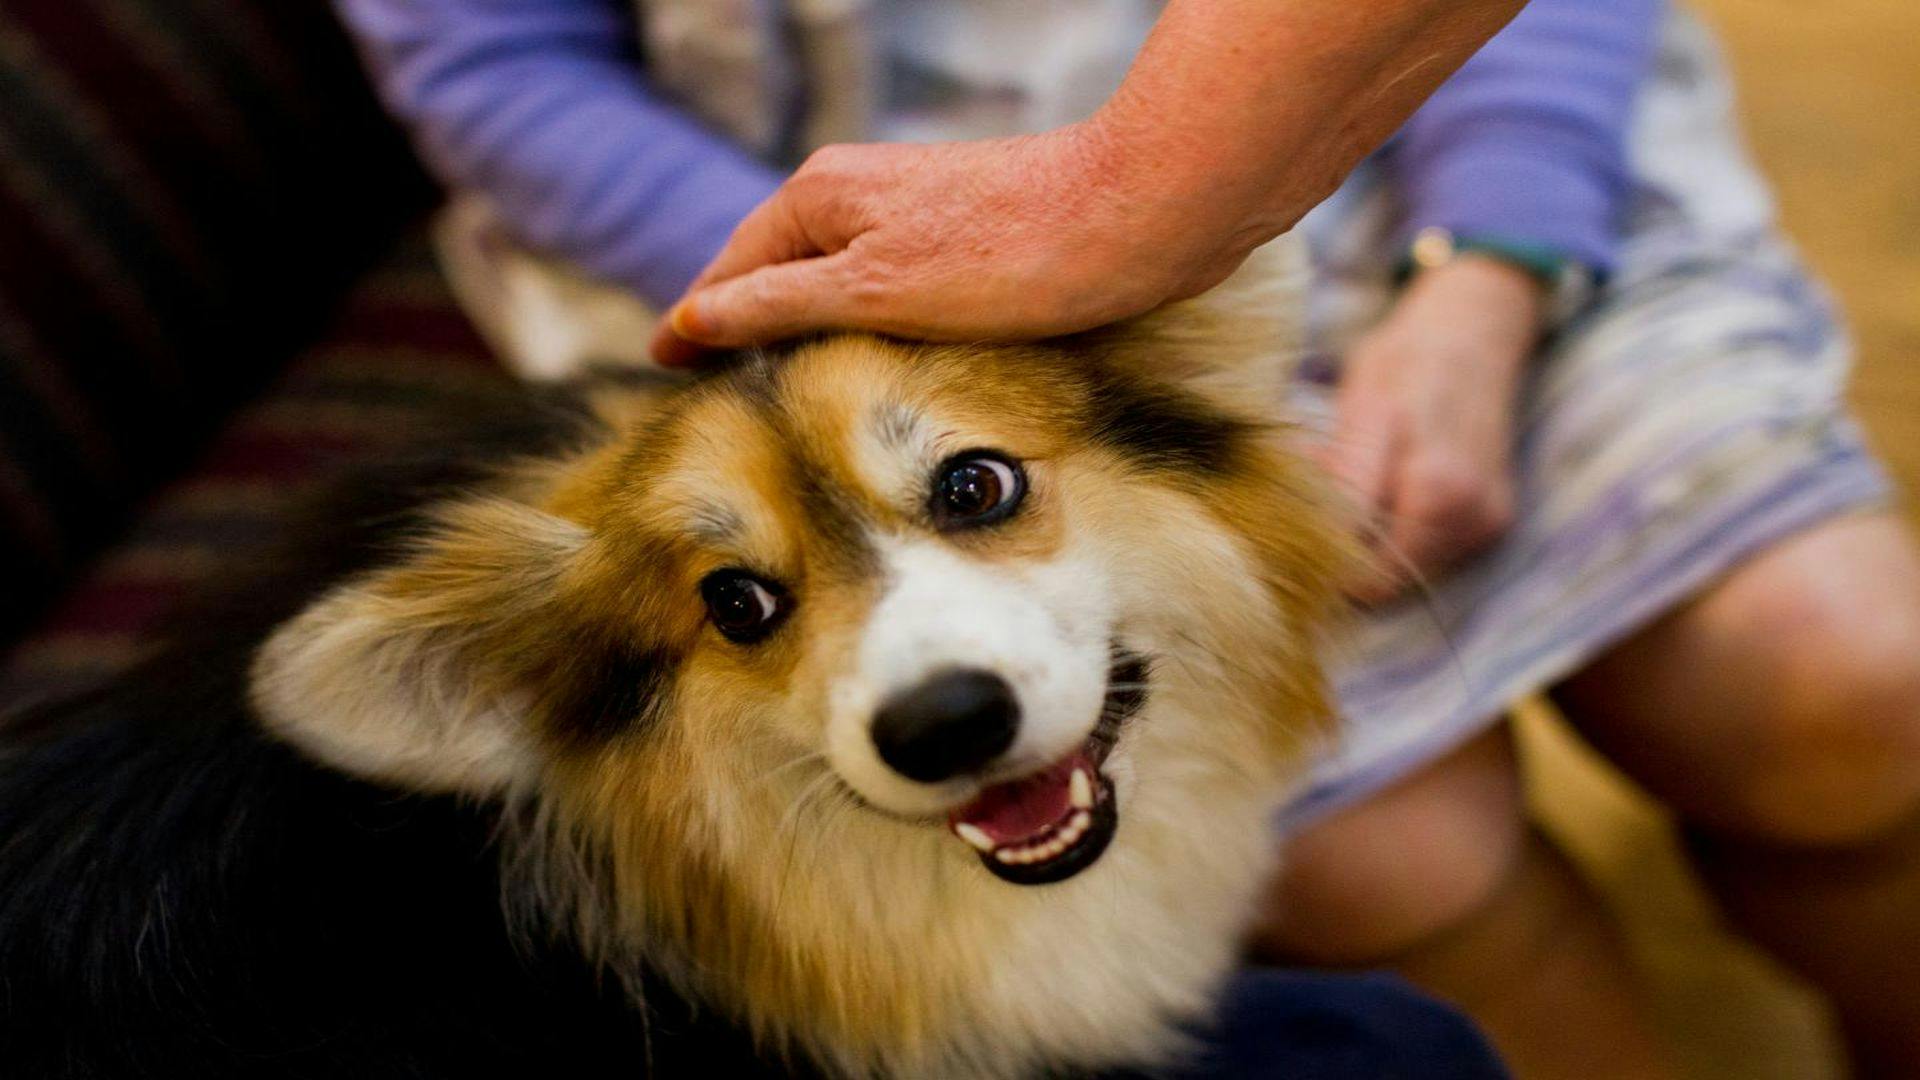 Could Therapy Animal Visitation Pose Risks at Healthcare Facilities?